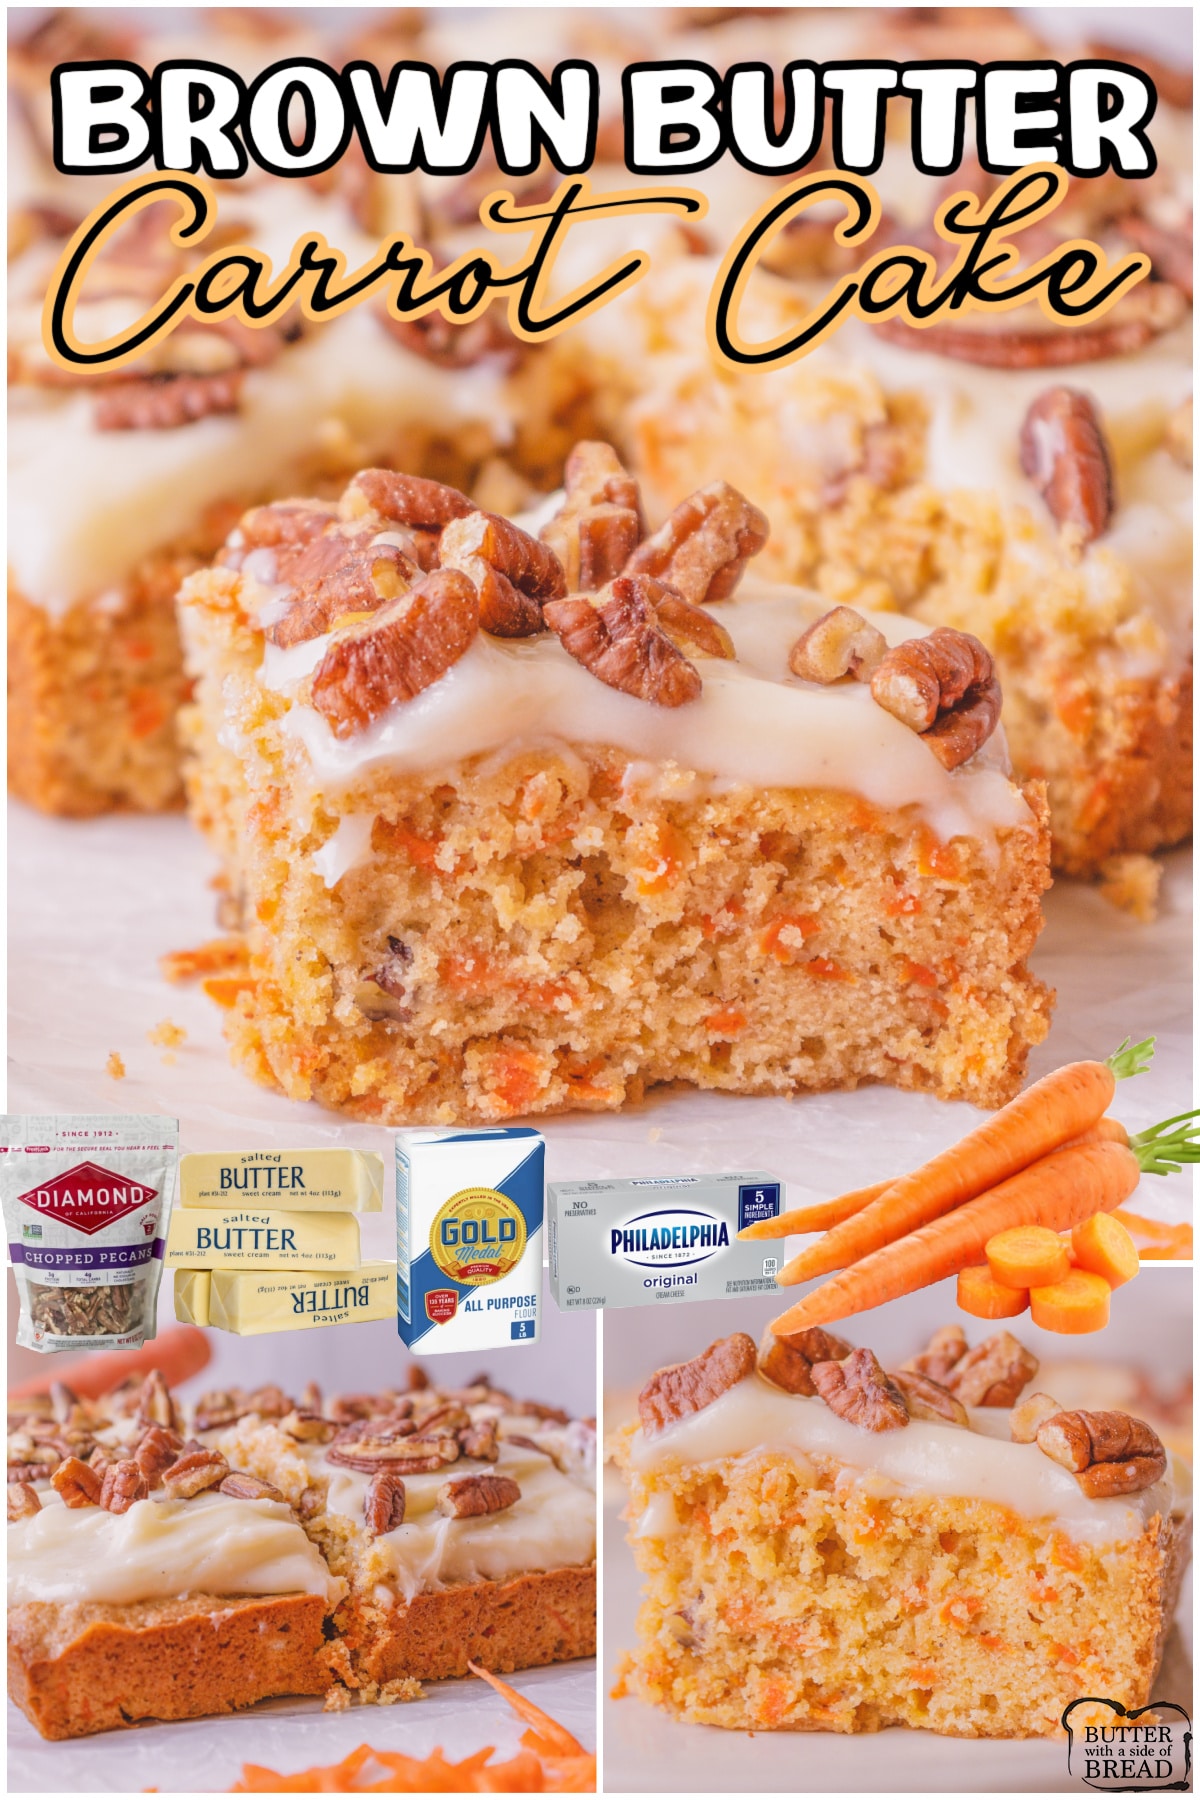 Brown Butter Carrot Cake made with browned butter, freshly grated carrots, and pecans! Simple carrot cake recipe with fantastic cream cheese frosting perfect for Easter!